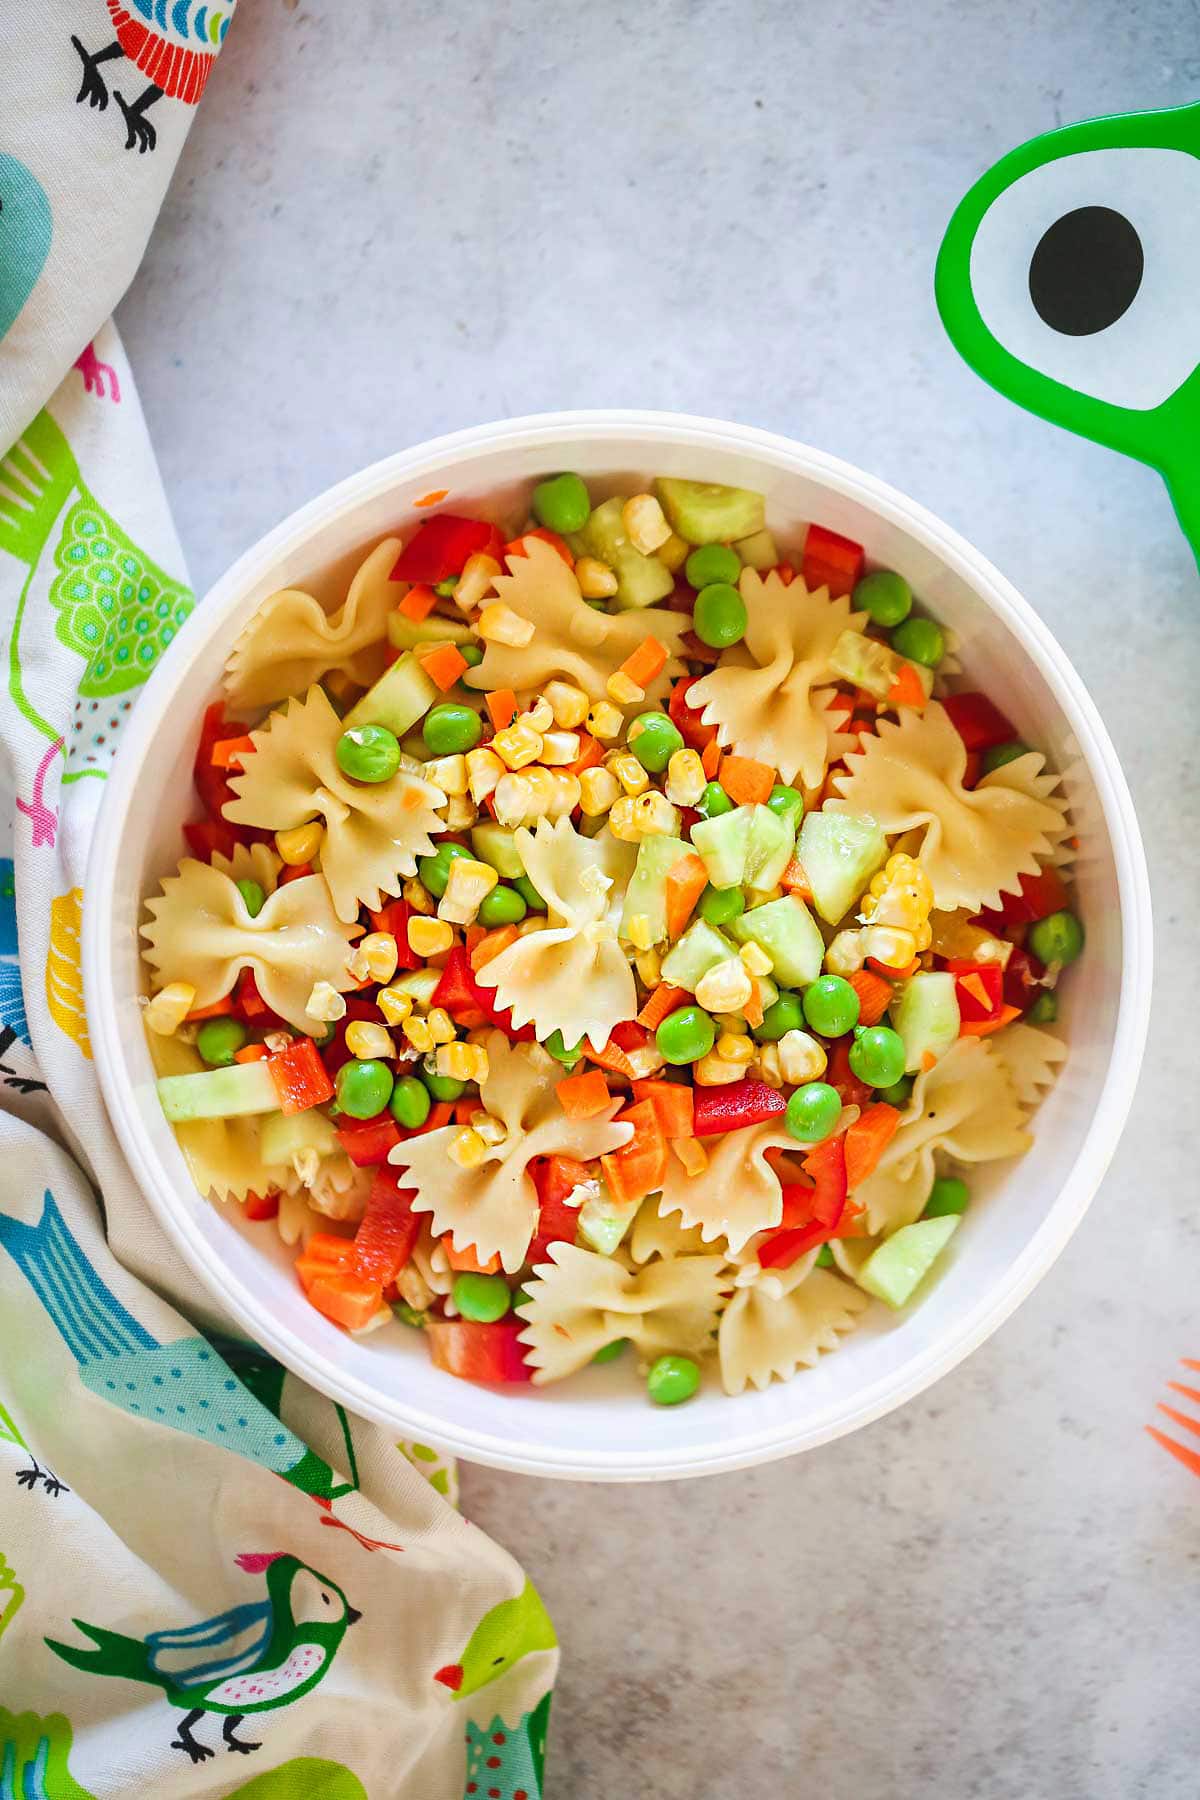 Pasta salad with sweet corn, peas, carrots, and sweet bell peppers in a white bowl and a cute bird pattern kitchen towel